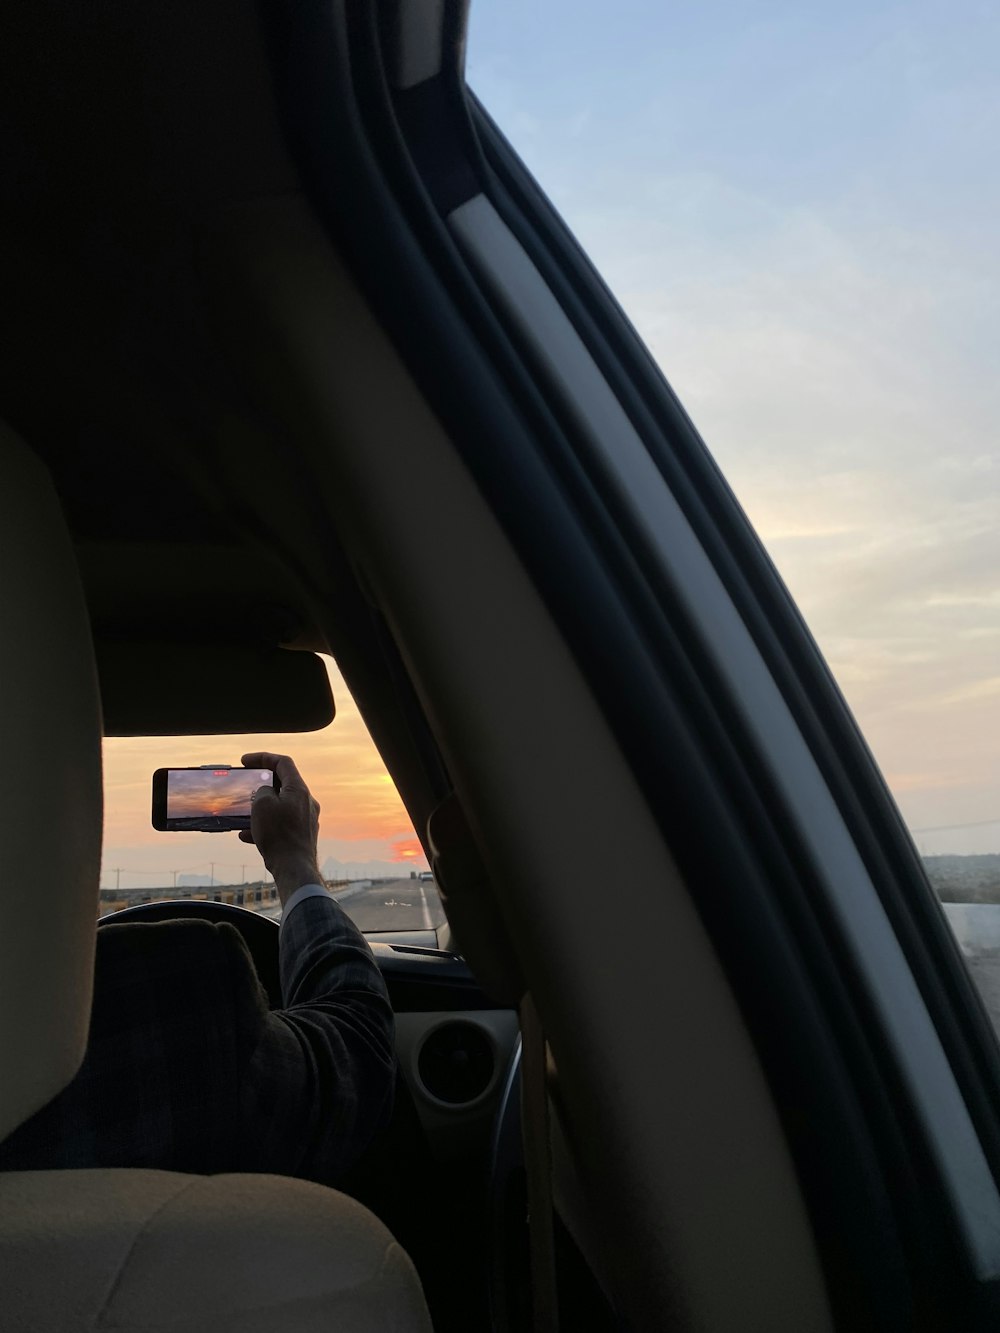 a person taking a picture of the sun setting in a car